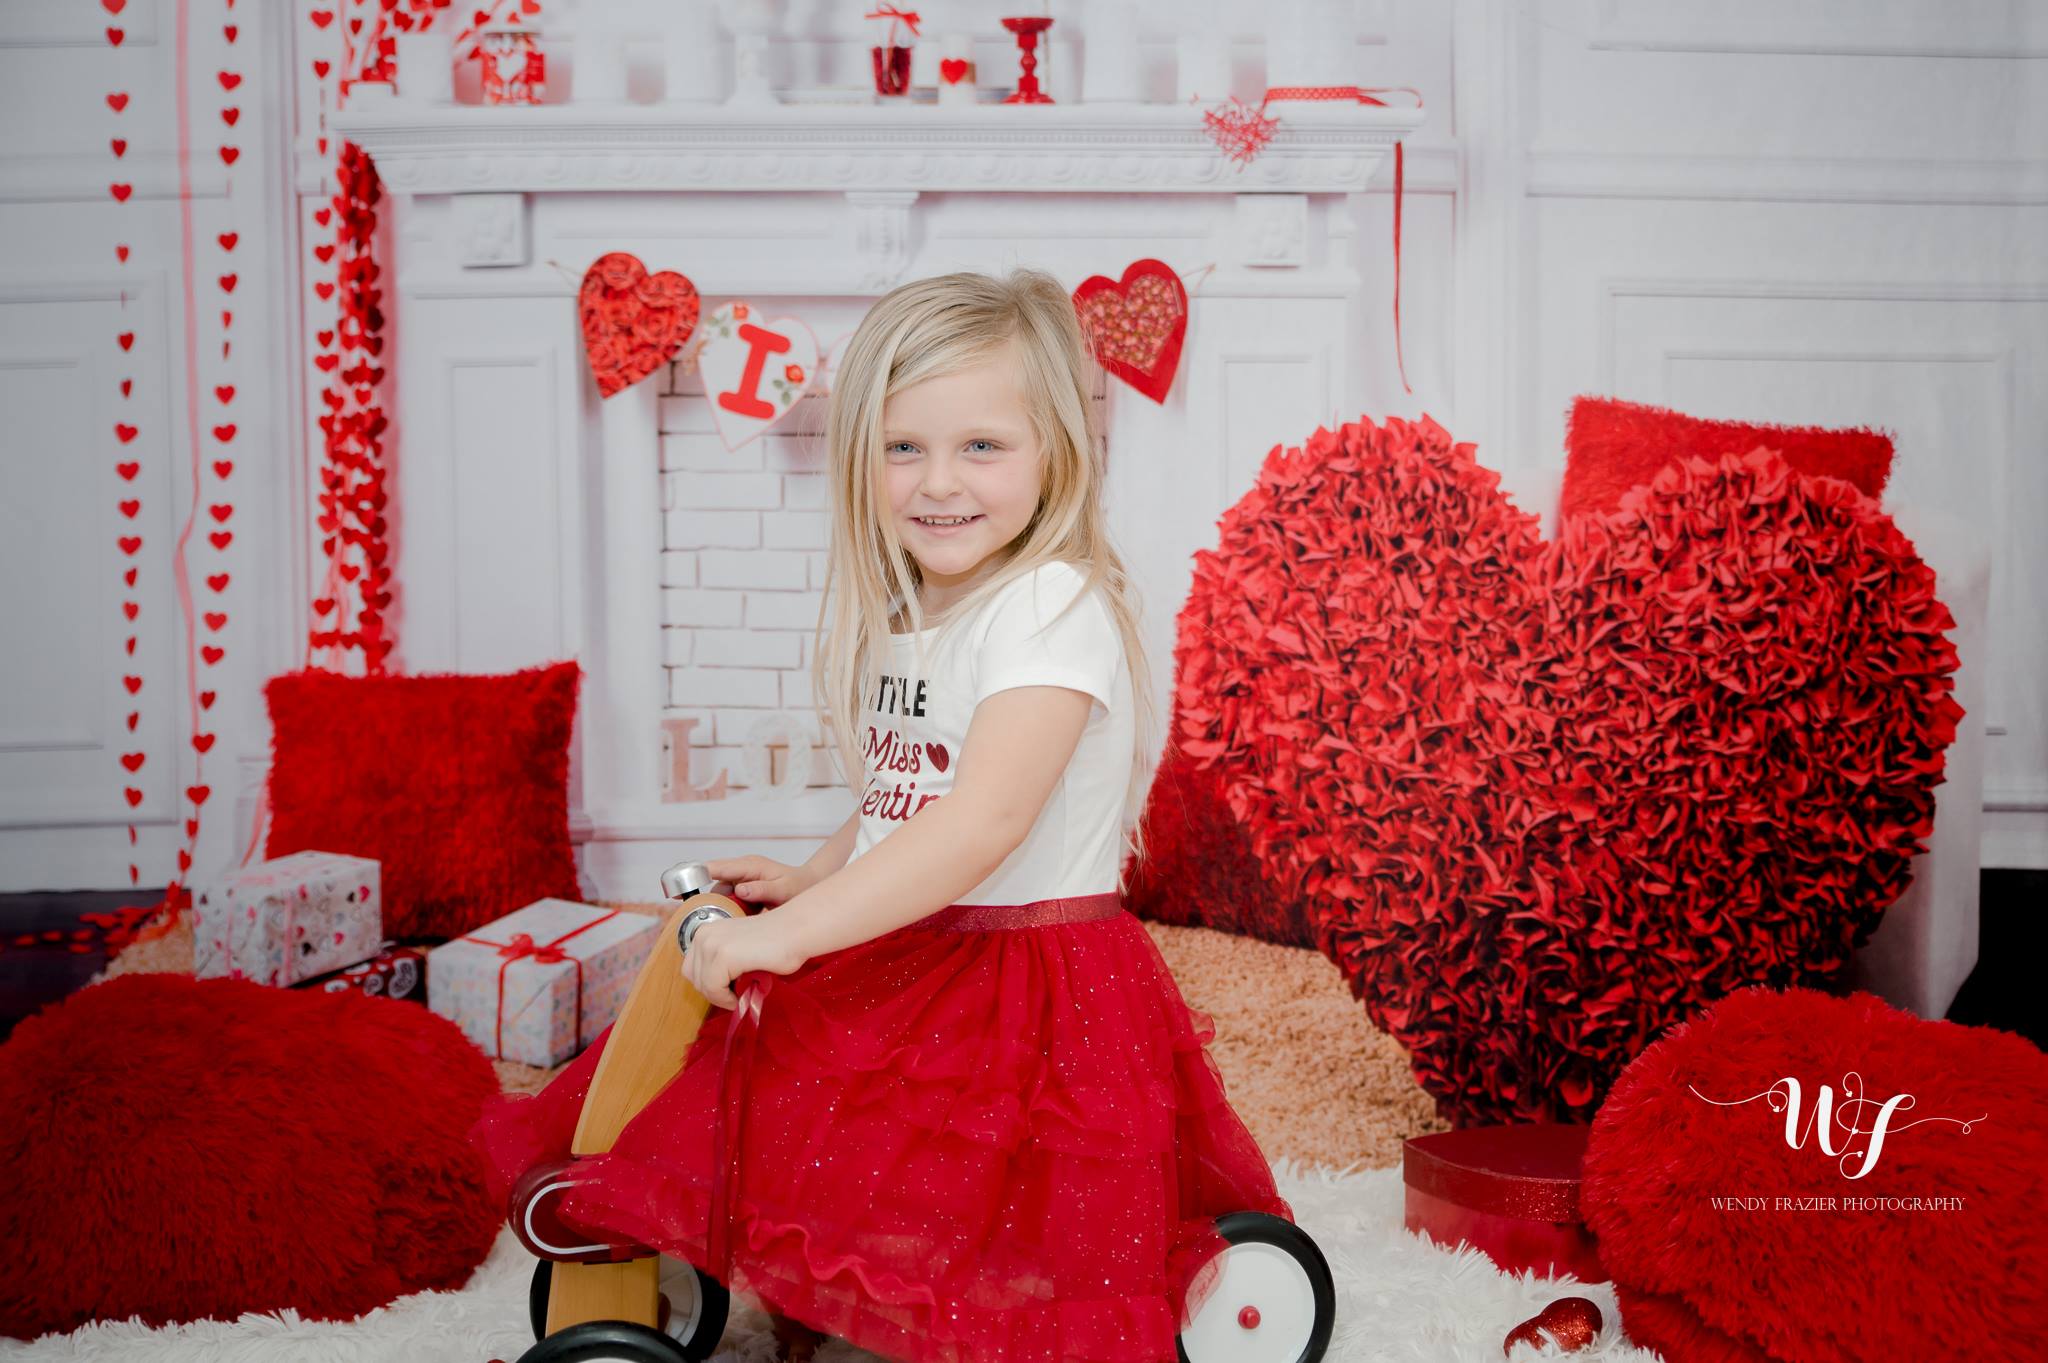 Kate Valentine's Day White House Backdrop for Photography